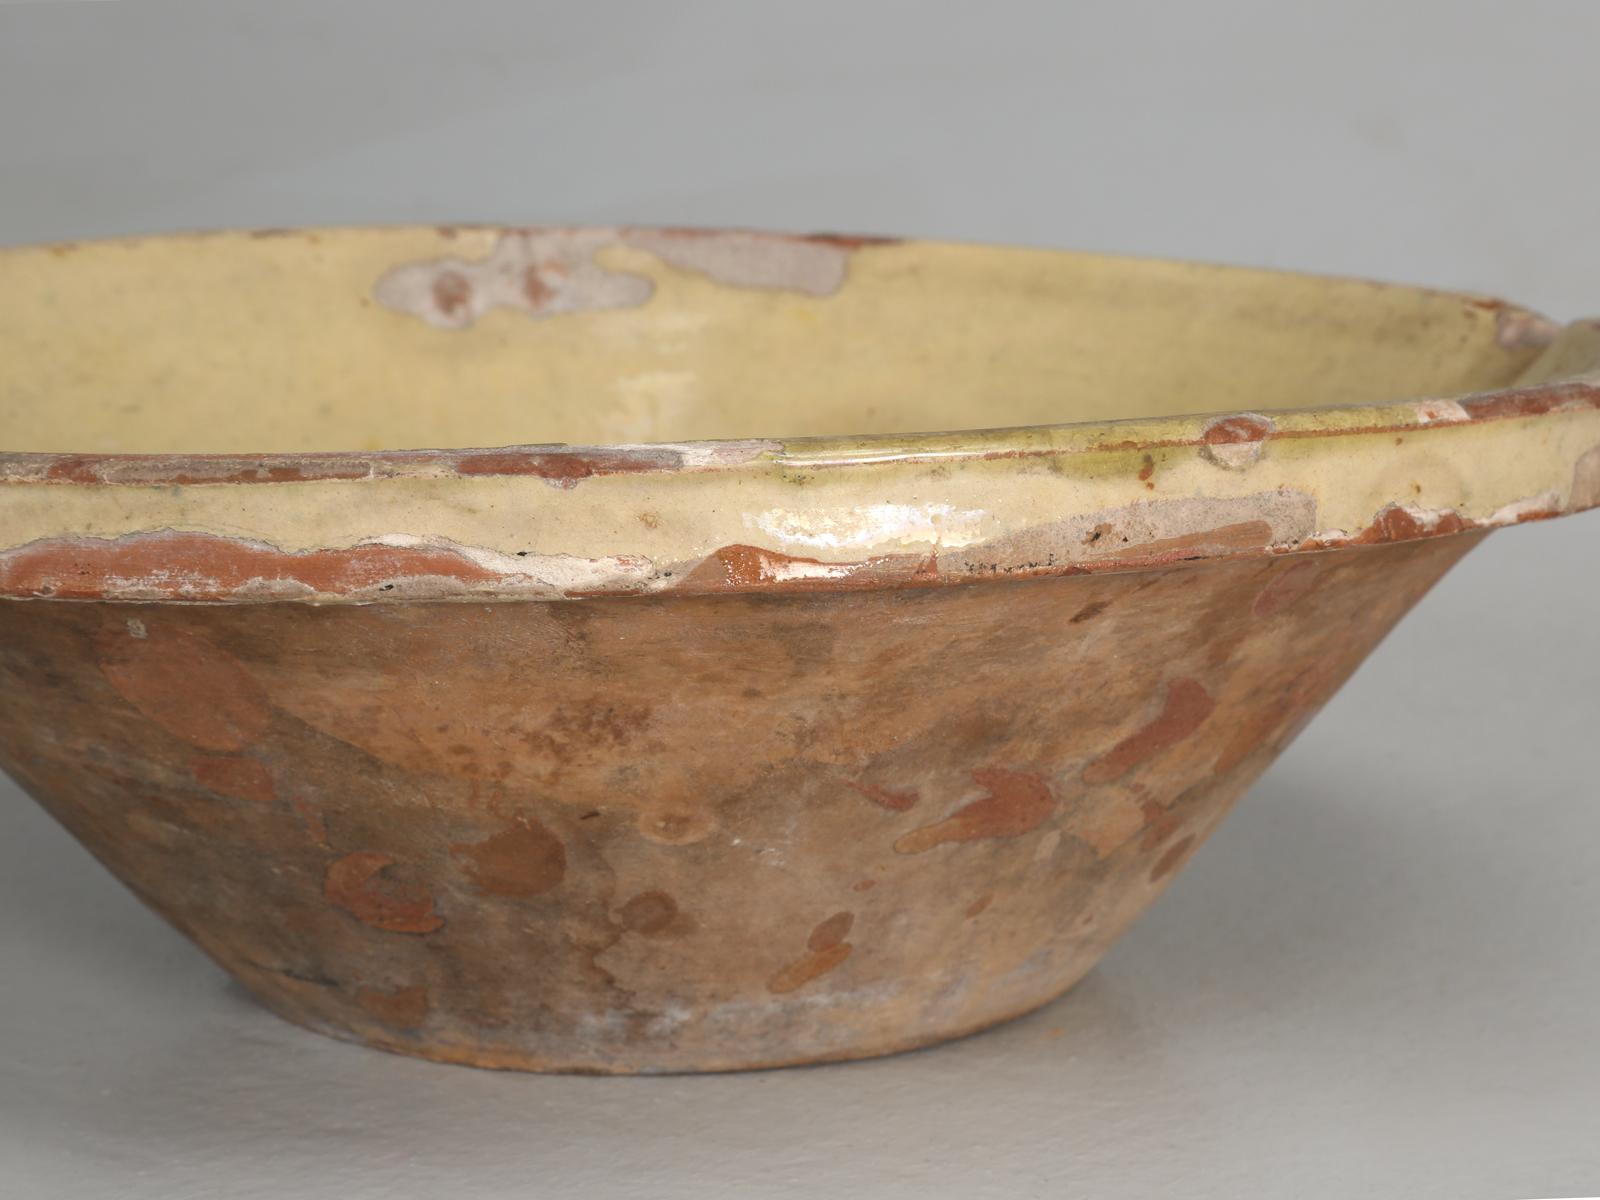 Earthenware Antique English Pancheon Bowl from Leek in Northern England, 1stdibs New York